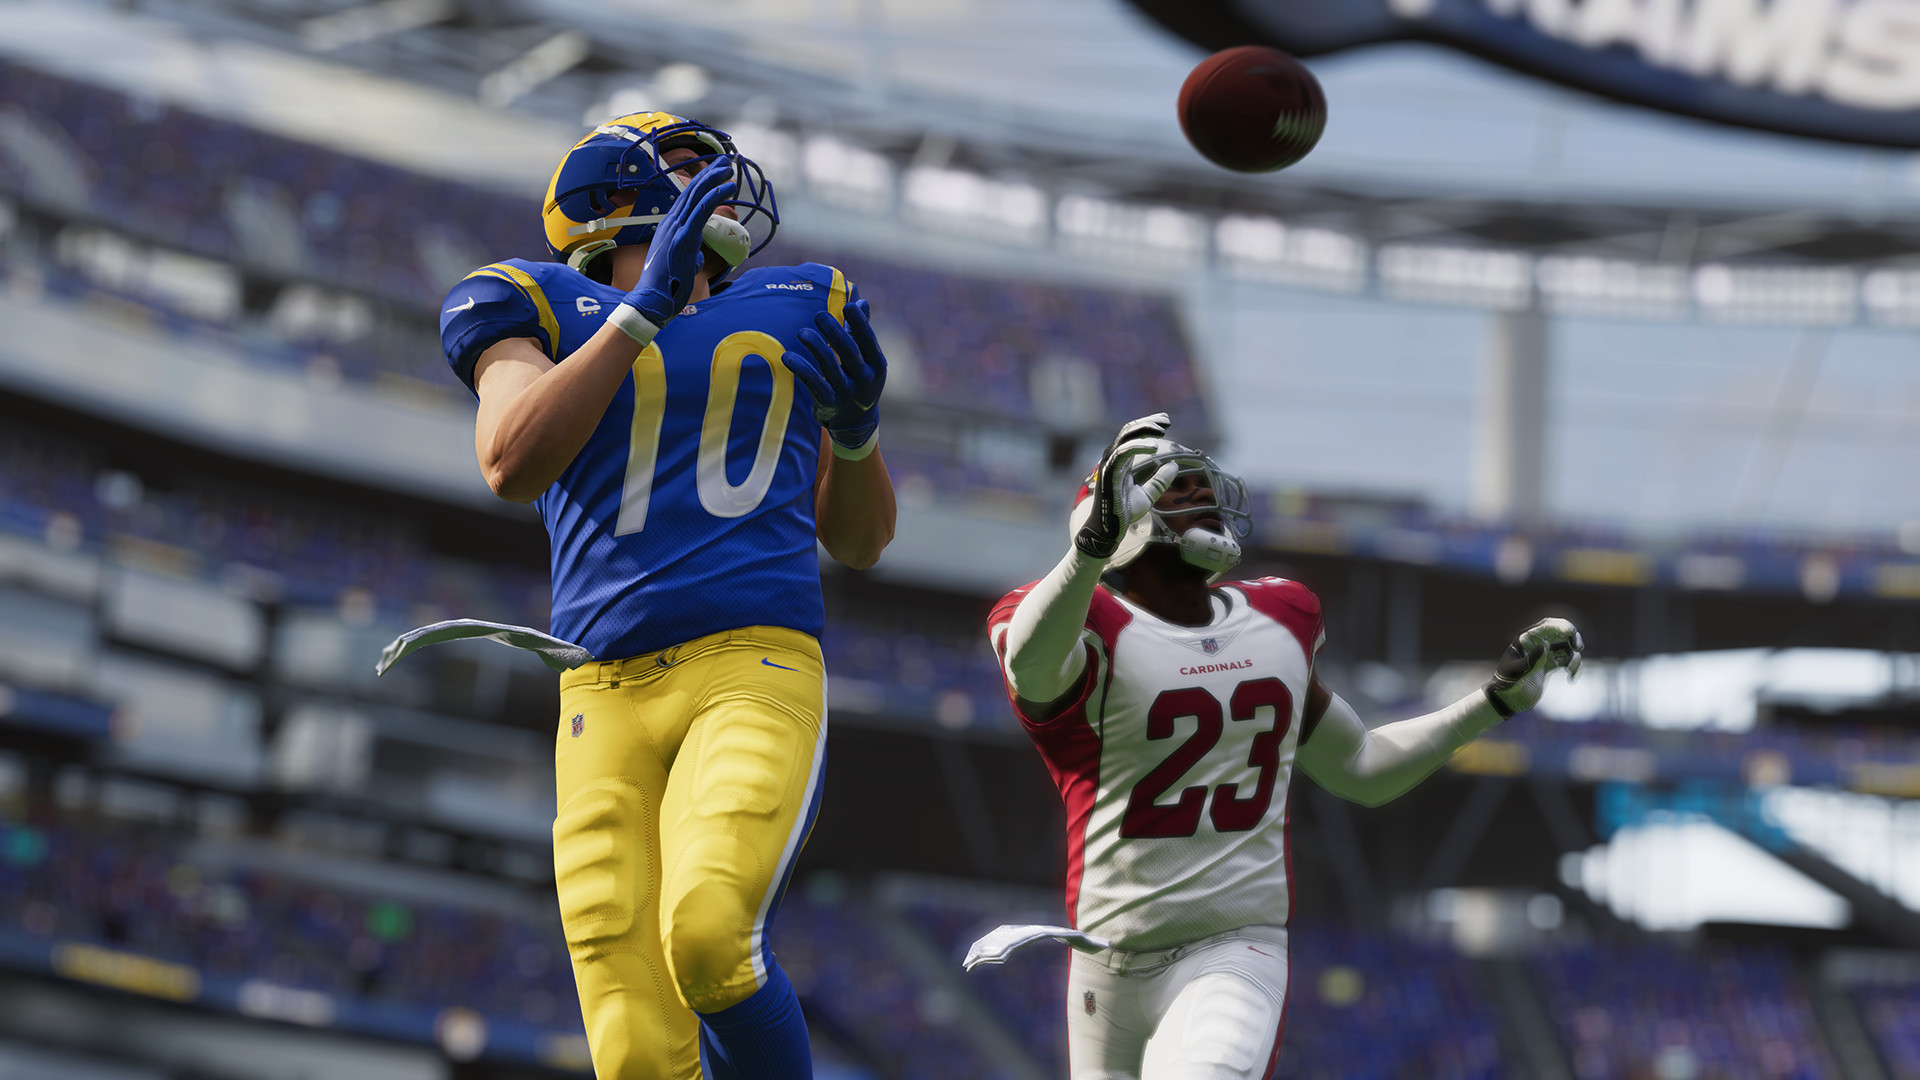 Introducing The Madden NFL 23 Blitz Elite Collection